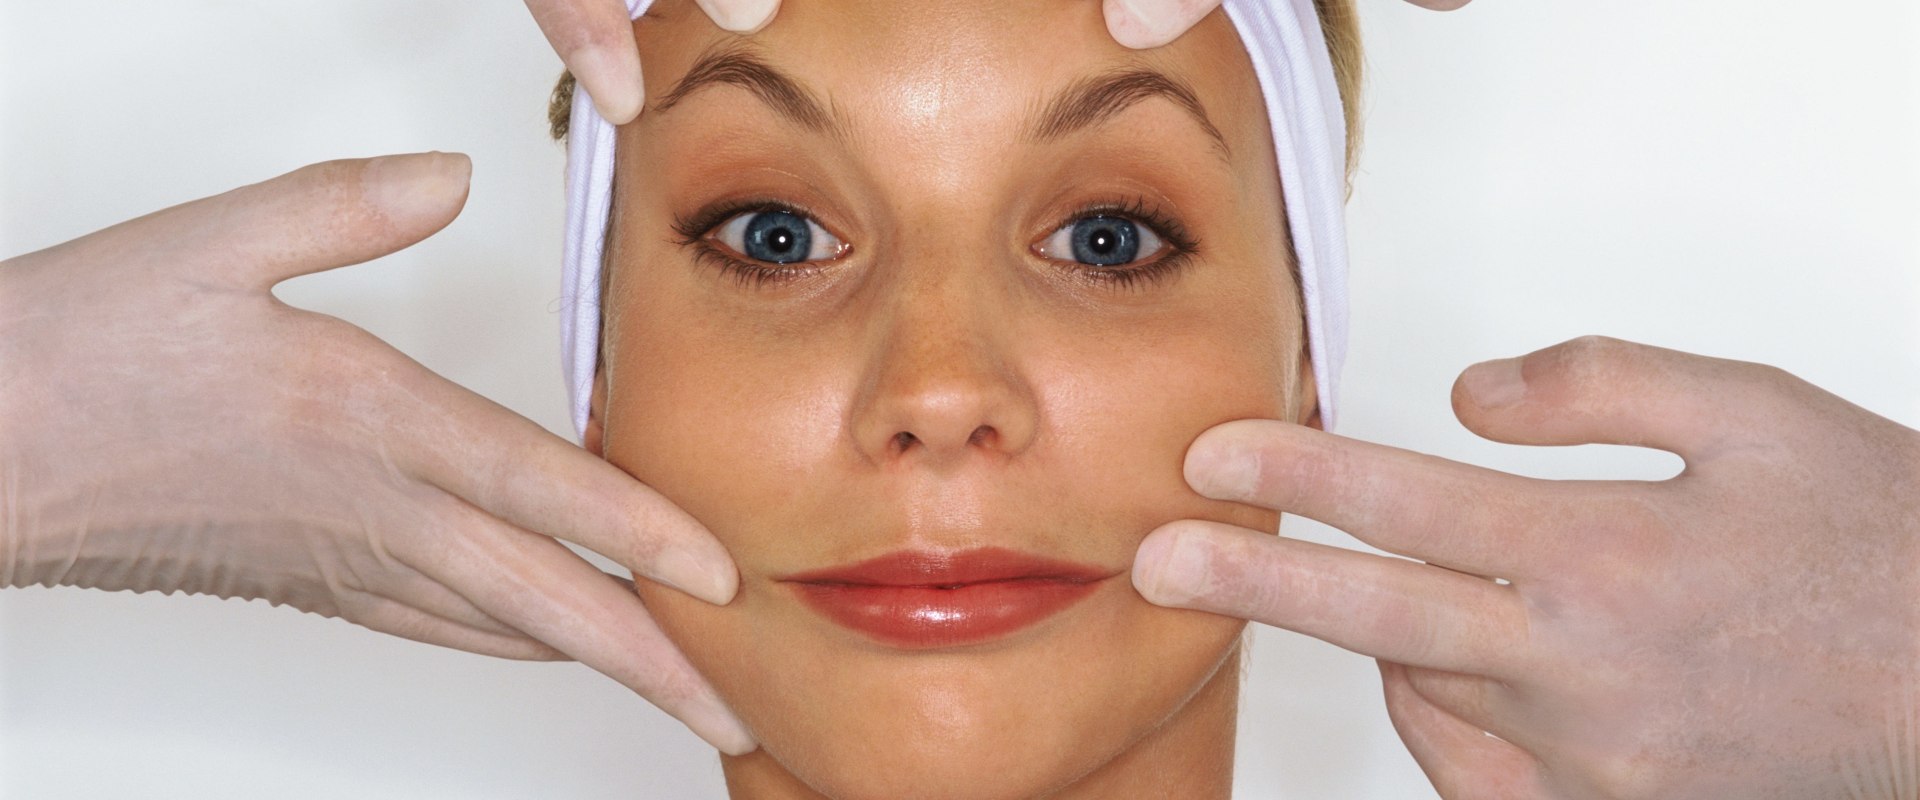 The Best Countries for Affordable Plastic Surgery